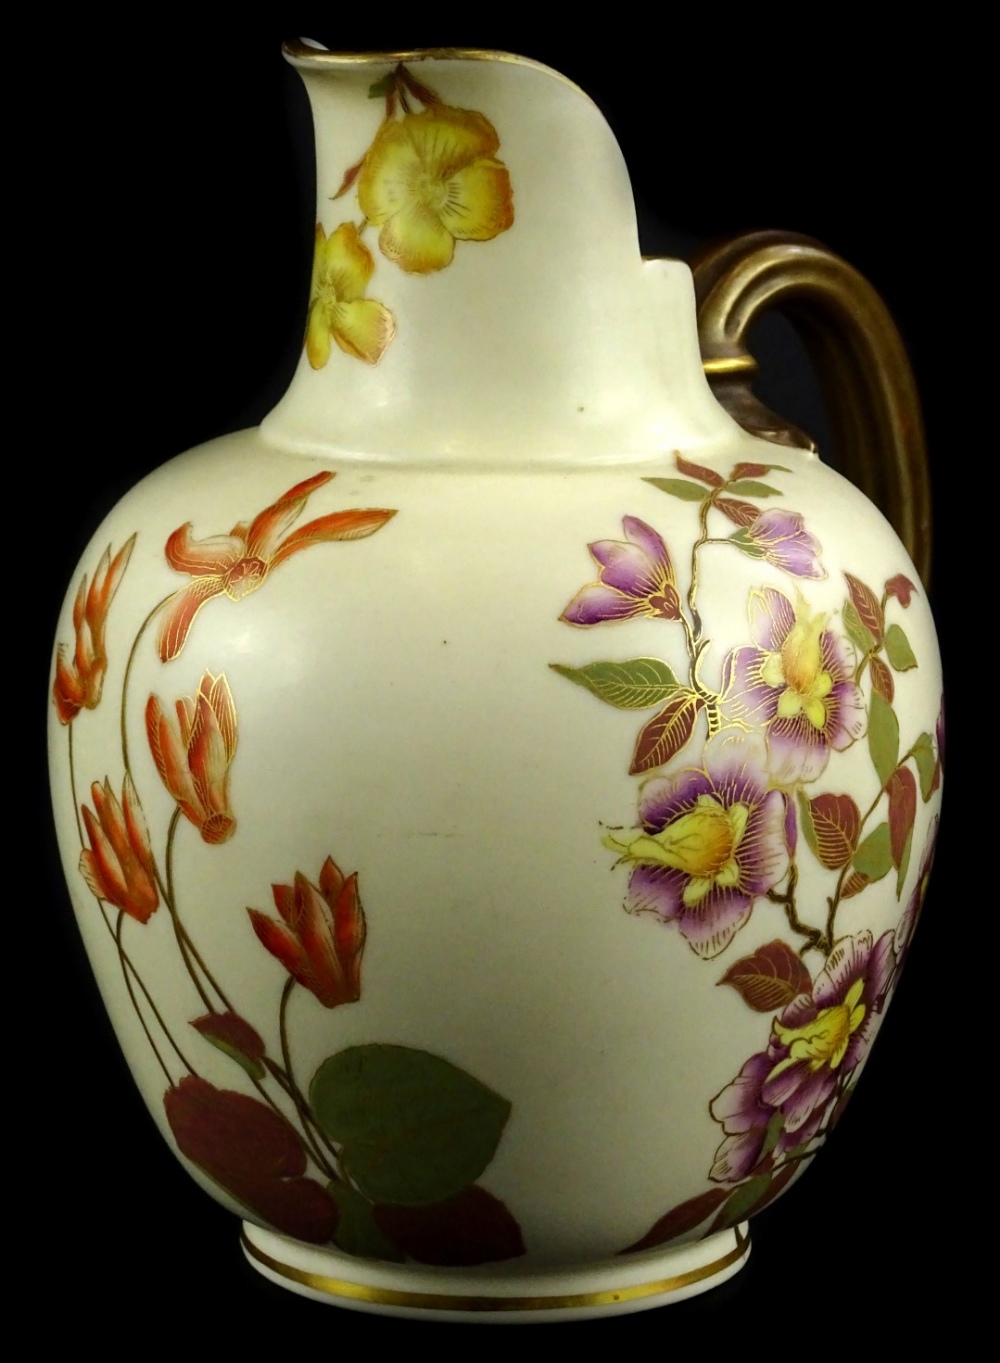 A Royal Worcester porcelain ewer, decorated with flowers in the oriental style, picked out in